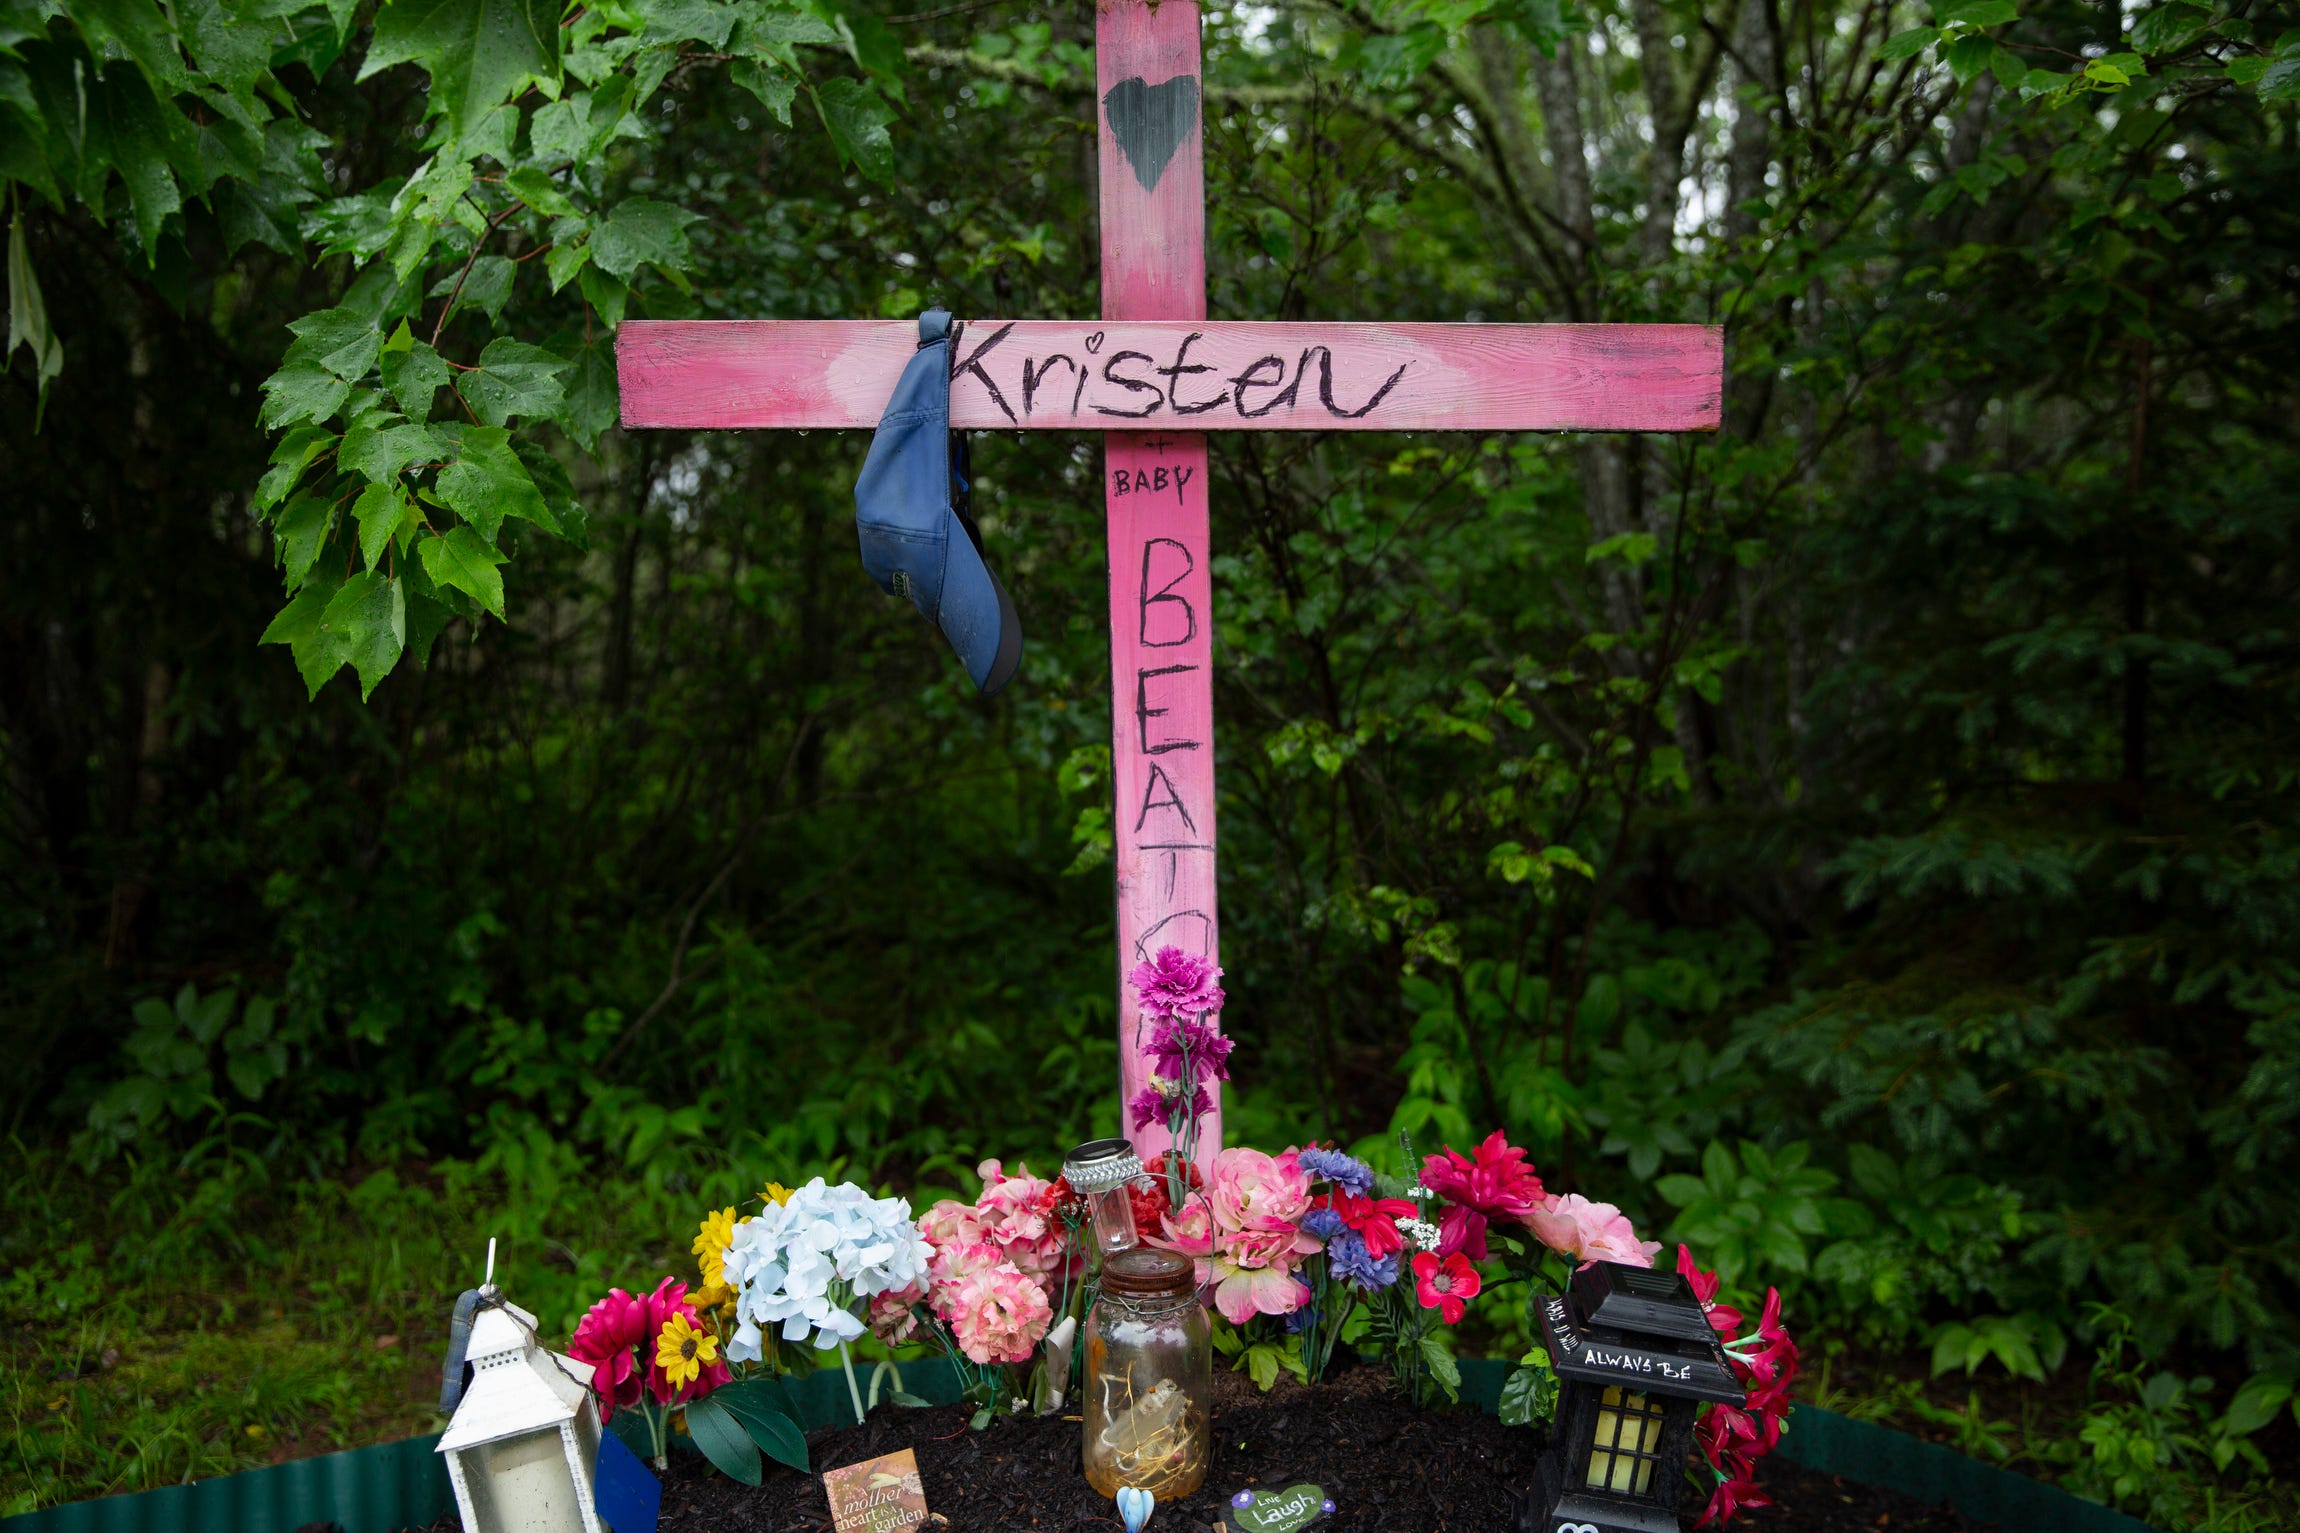 A memorial for Kristen Beaton and "Baby Beaton" is placed at the site of her murder in April 2020. Beaton, a nurse and mother, was pregnant at the time of her murder.